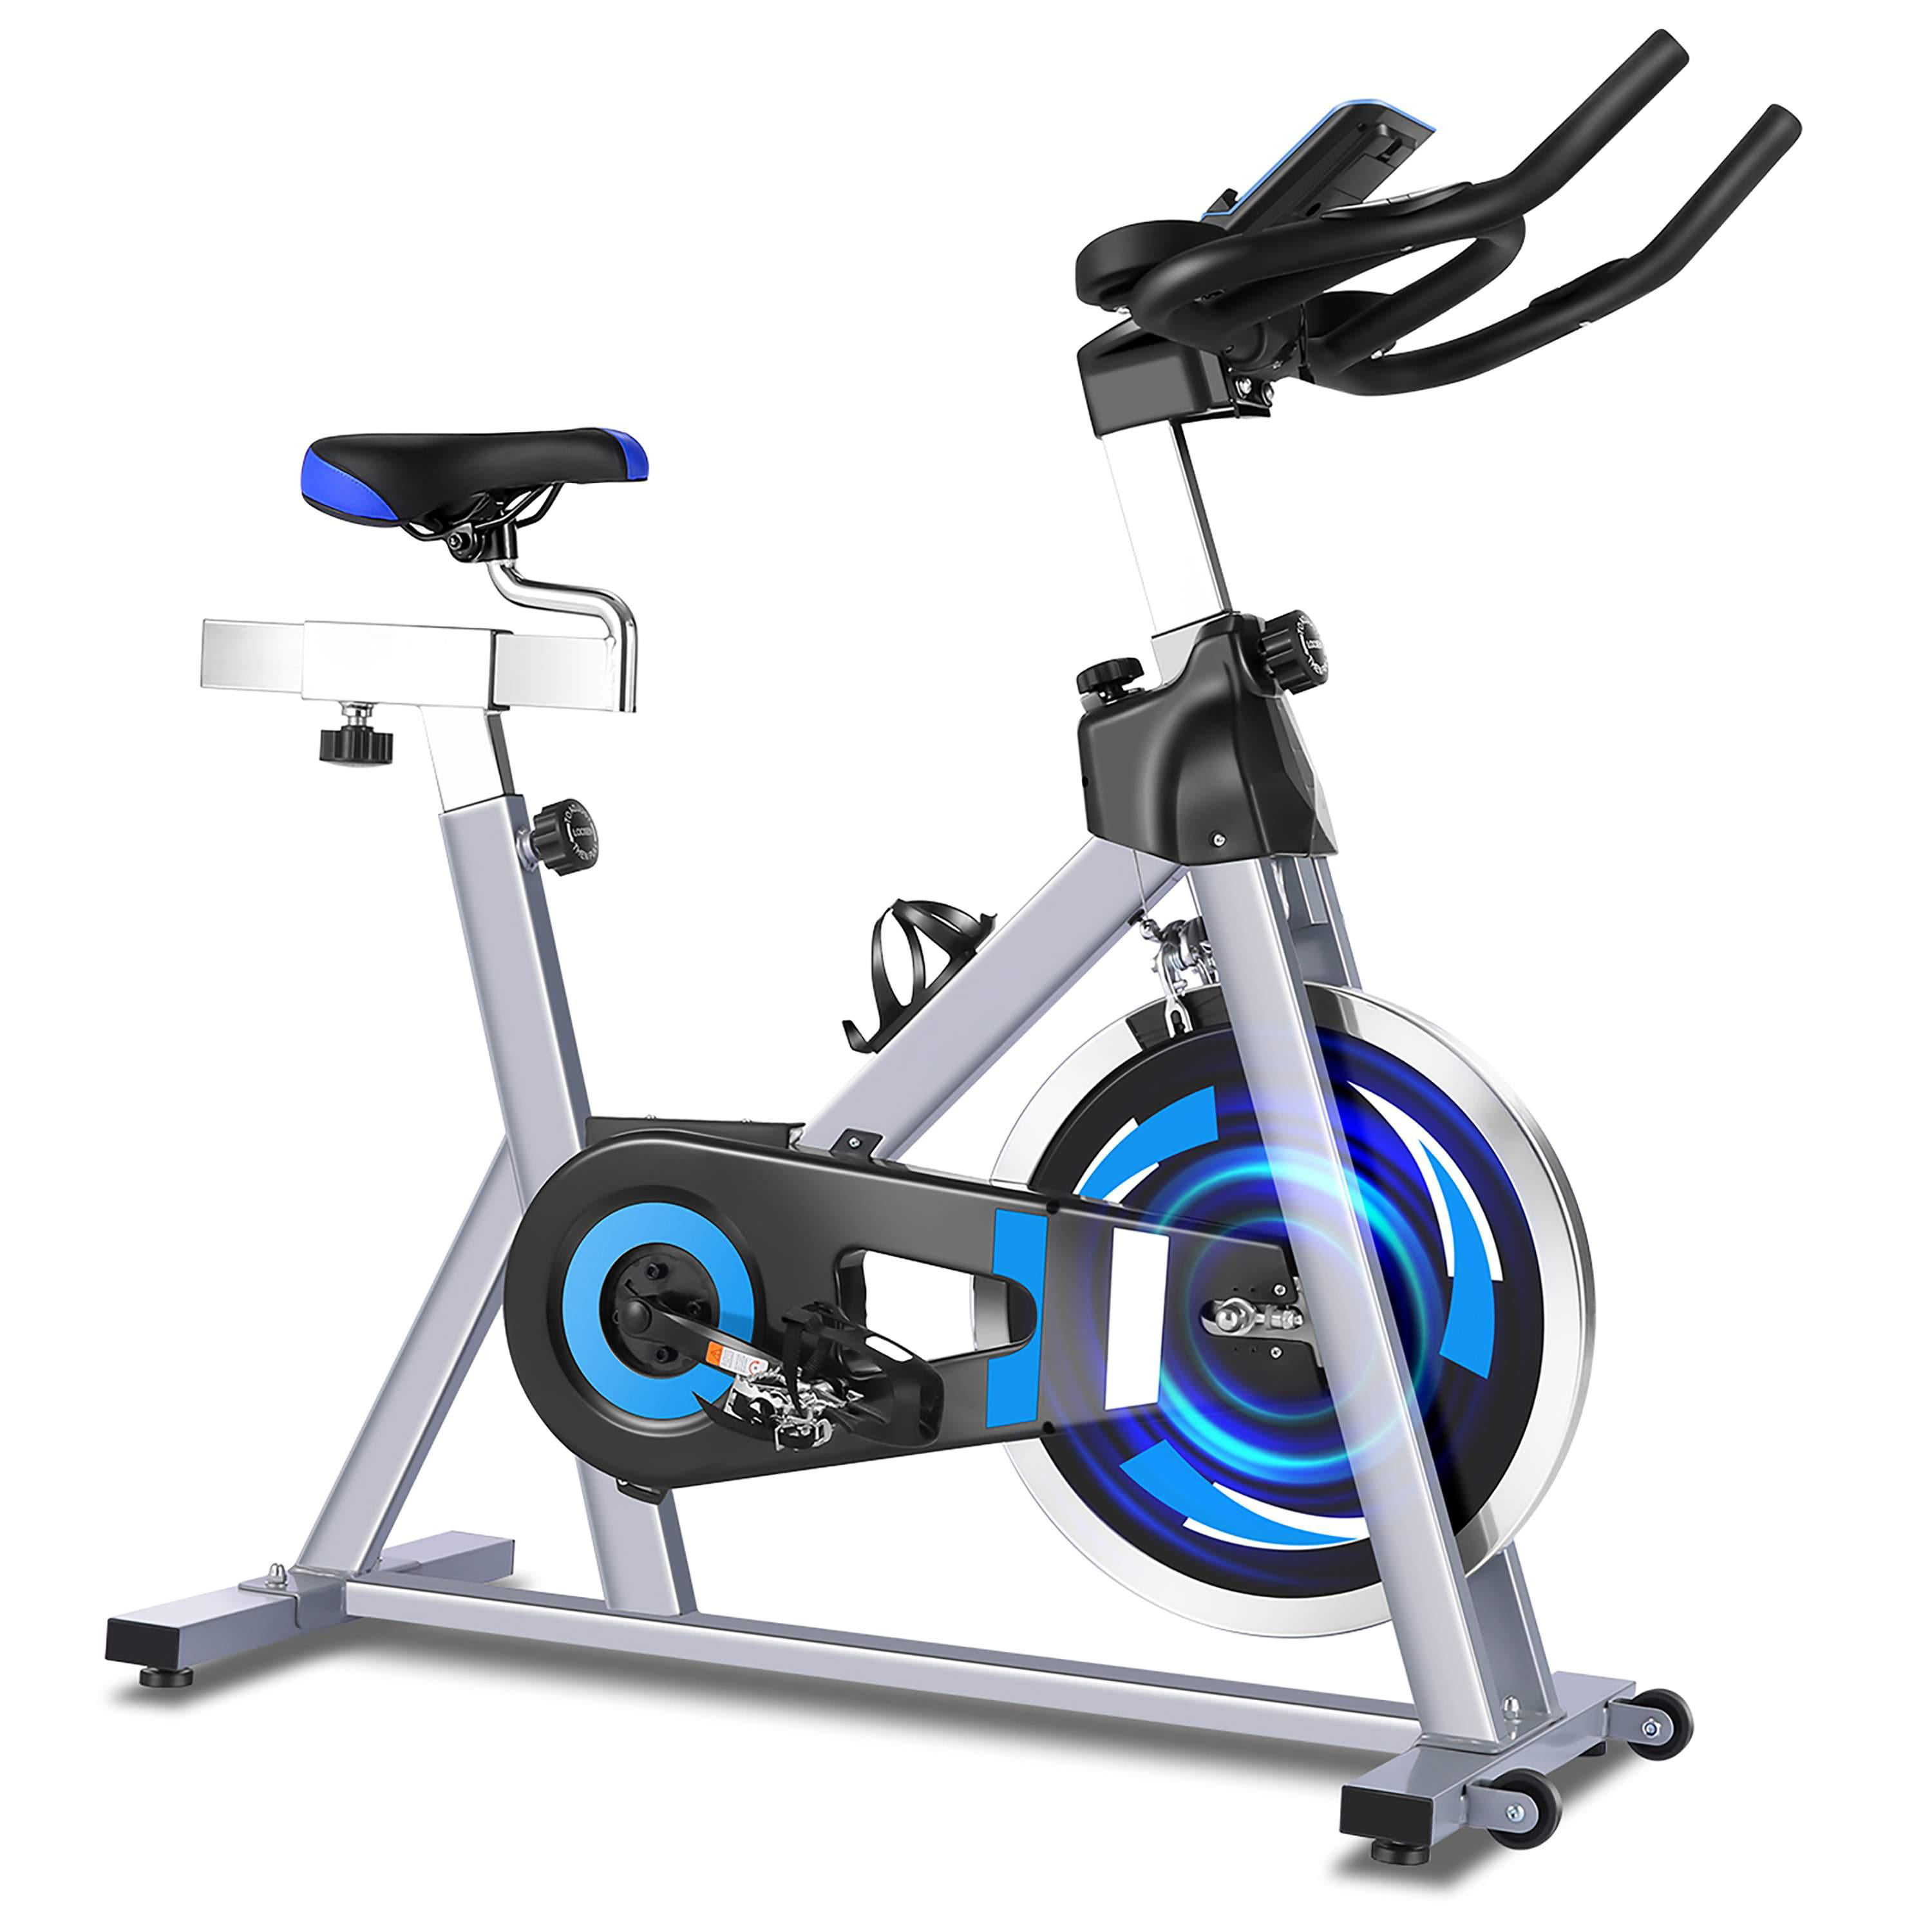 Details about   HEKA Exercise Bicycle Cycling Fitness Stationary Bike Cardio Home~Office Indoor 